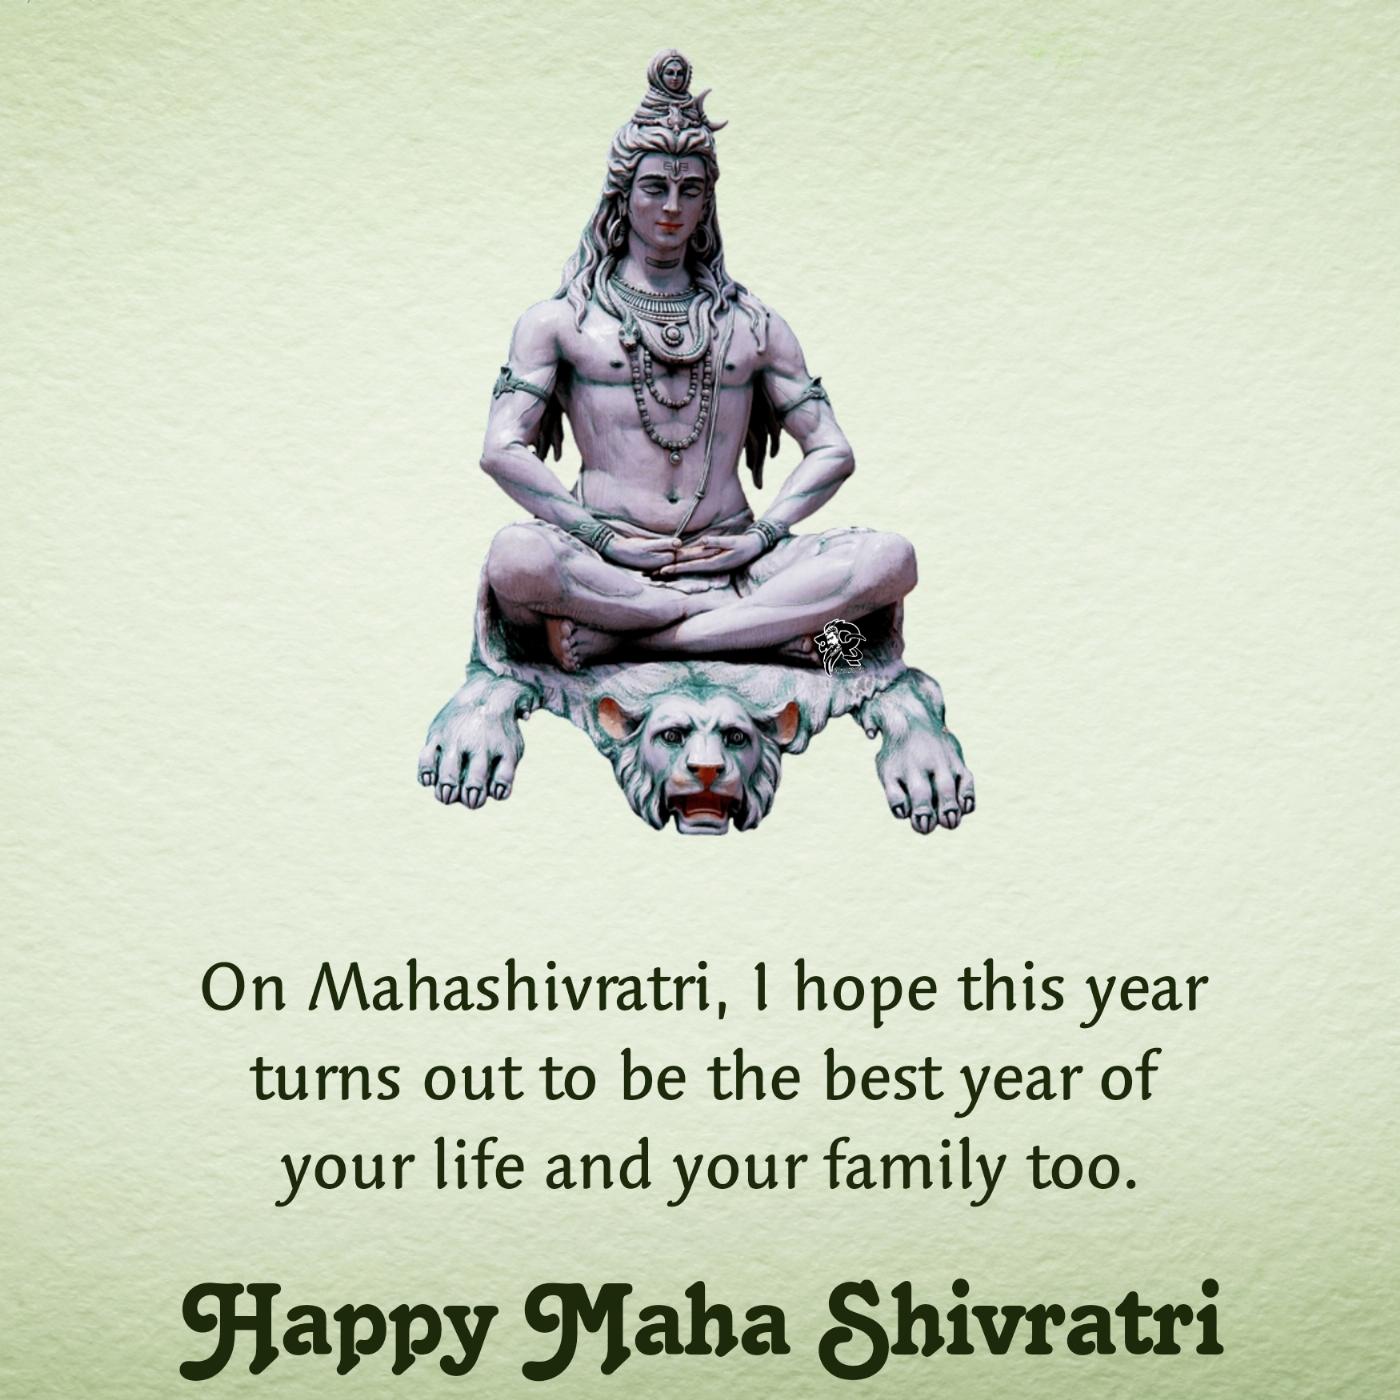 On Mahashivratri I hope this year turns out to be the best year